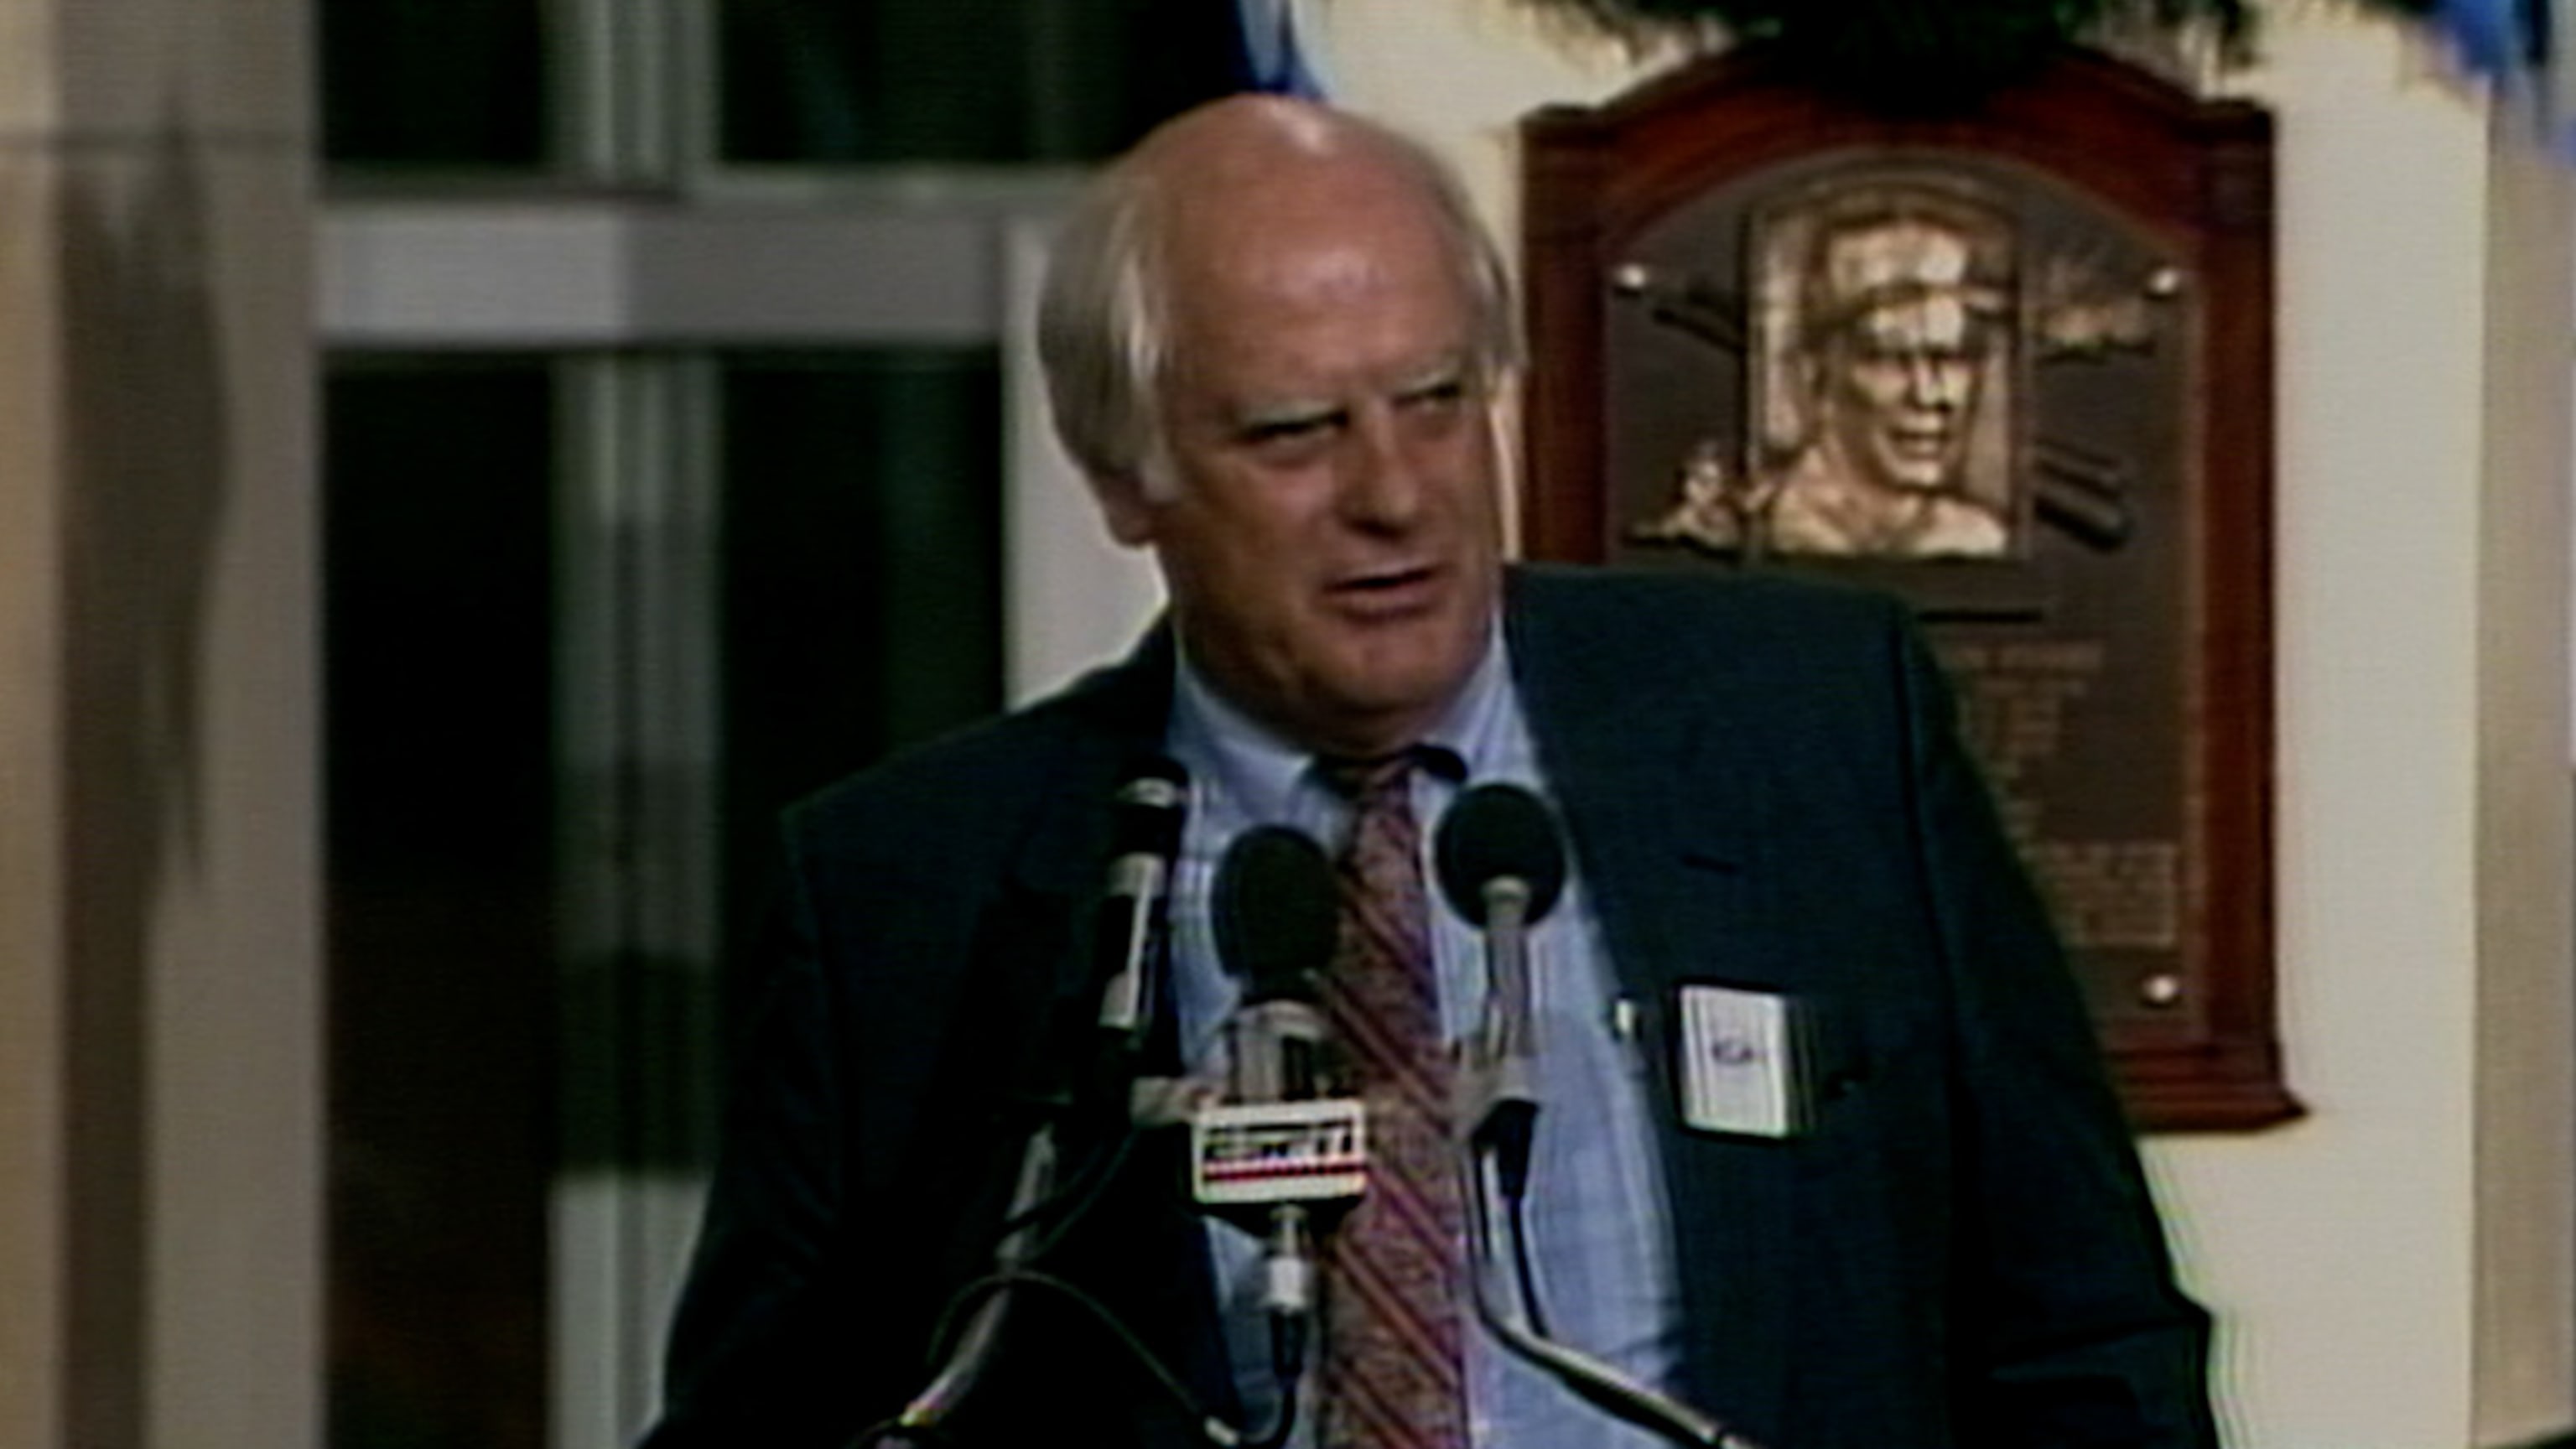 San Francisco Giants unveil statue of pitcher Gaylord Perry